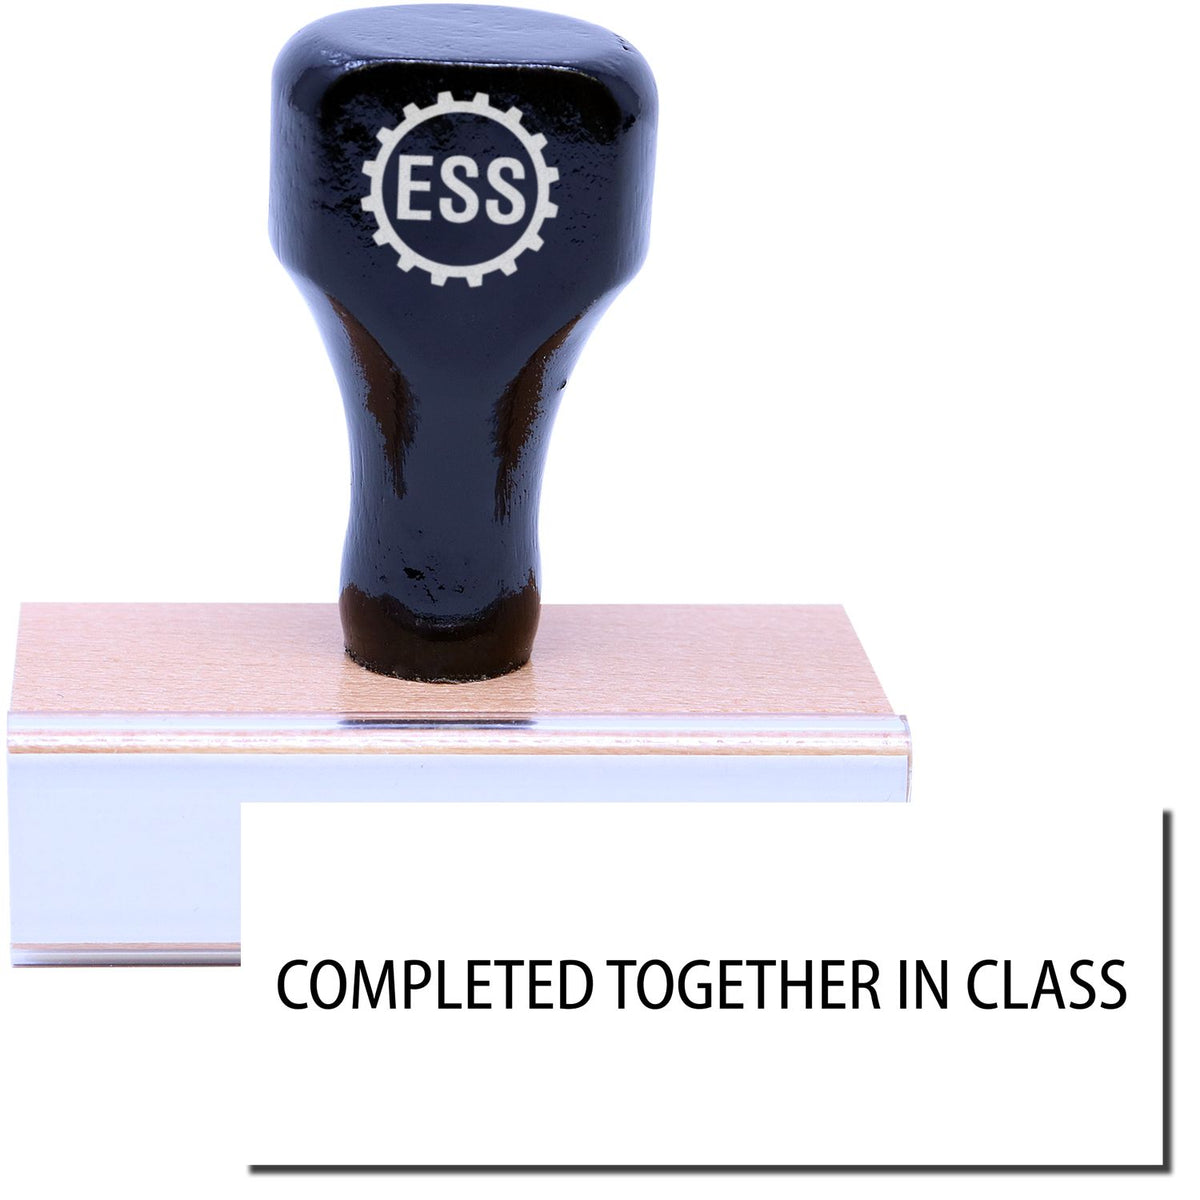 A stock office rubber stamp with a stamped image showing how the text &quot;COMPLETED TOGETHER IN CLASS&quot; in a large font is displayed after stamping.